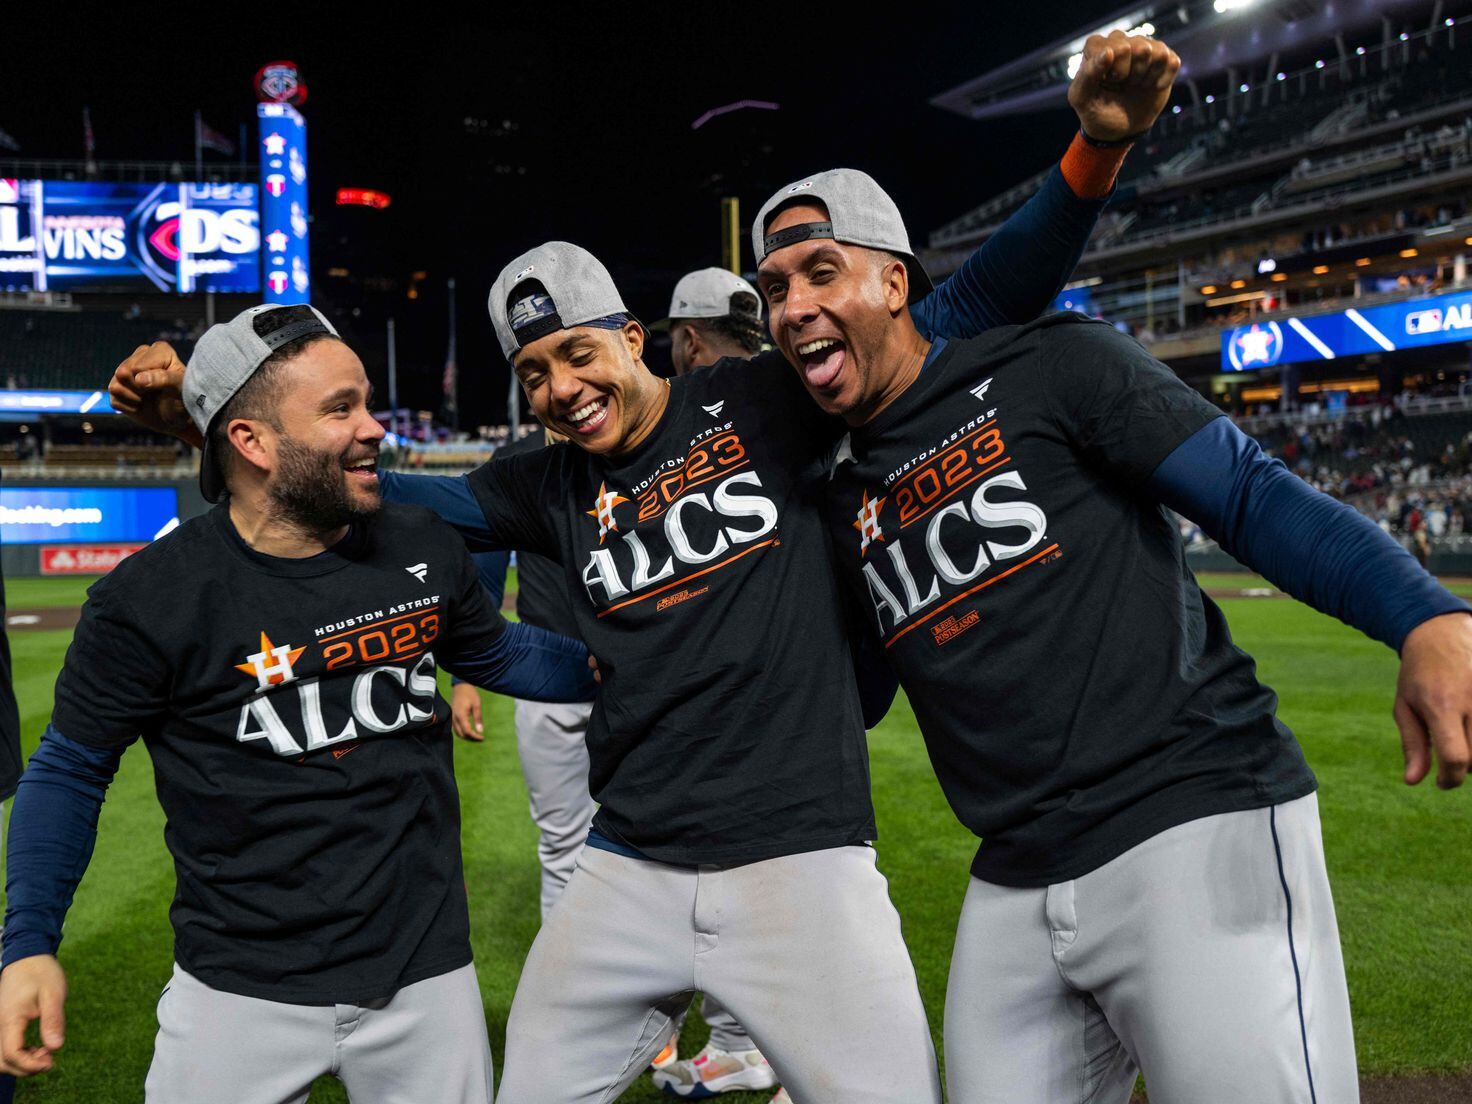 Lids Houston Astros 2022 World Series Champions Waiving Flag